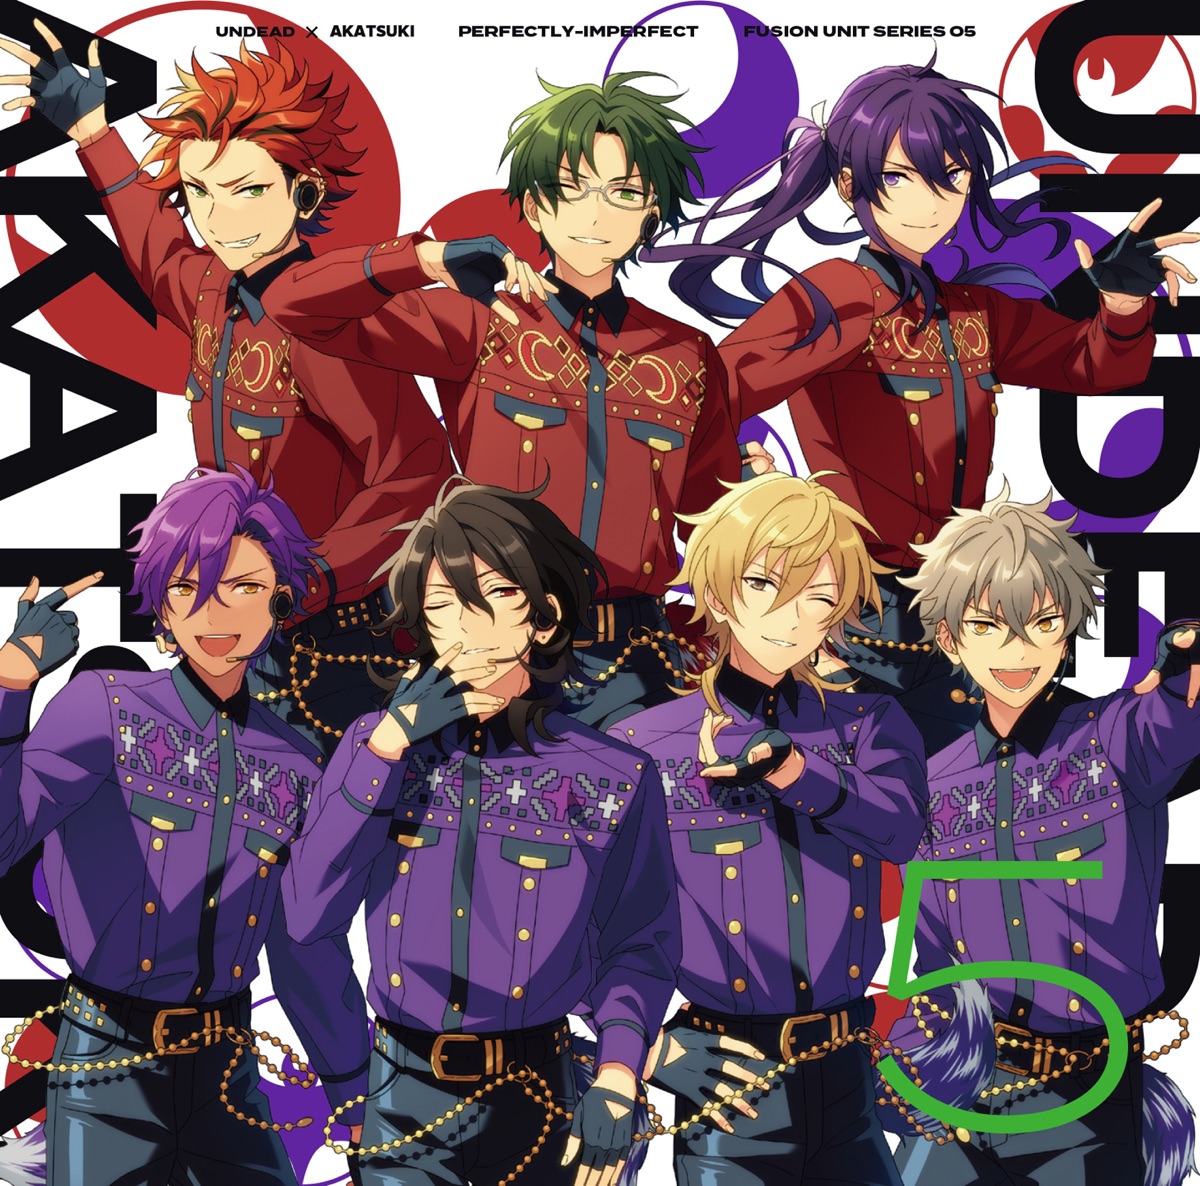 Cover for『UNDEAD × Akatsuki - PERFECTLY-IMPERFECT』from the release『UNDEAD × Akatsuki PERFECTLY-IMPERFECT Ensemble Stars!! FUSION UNIT SERIES 05』